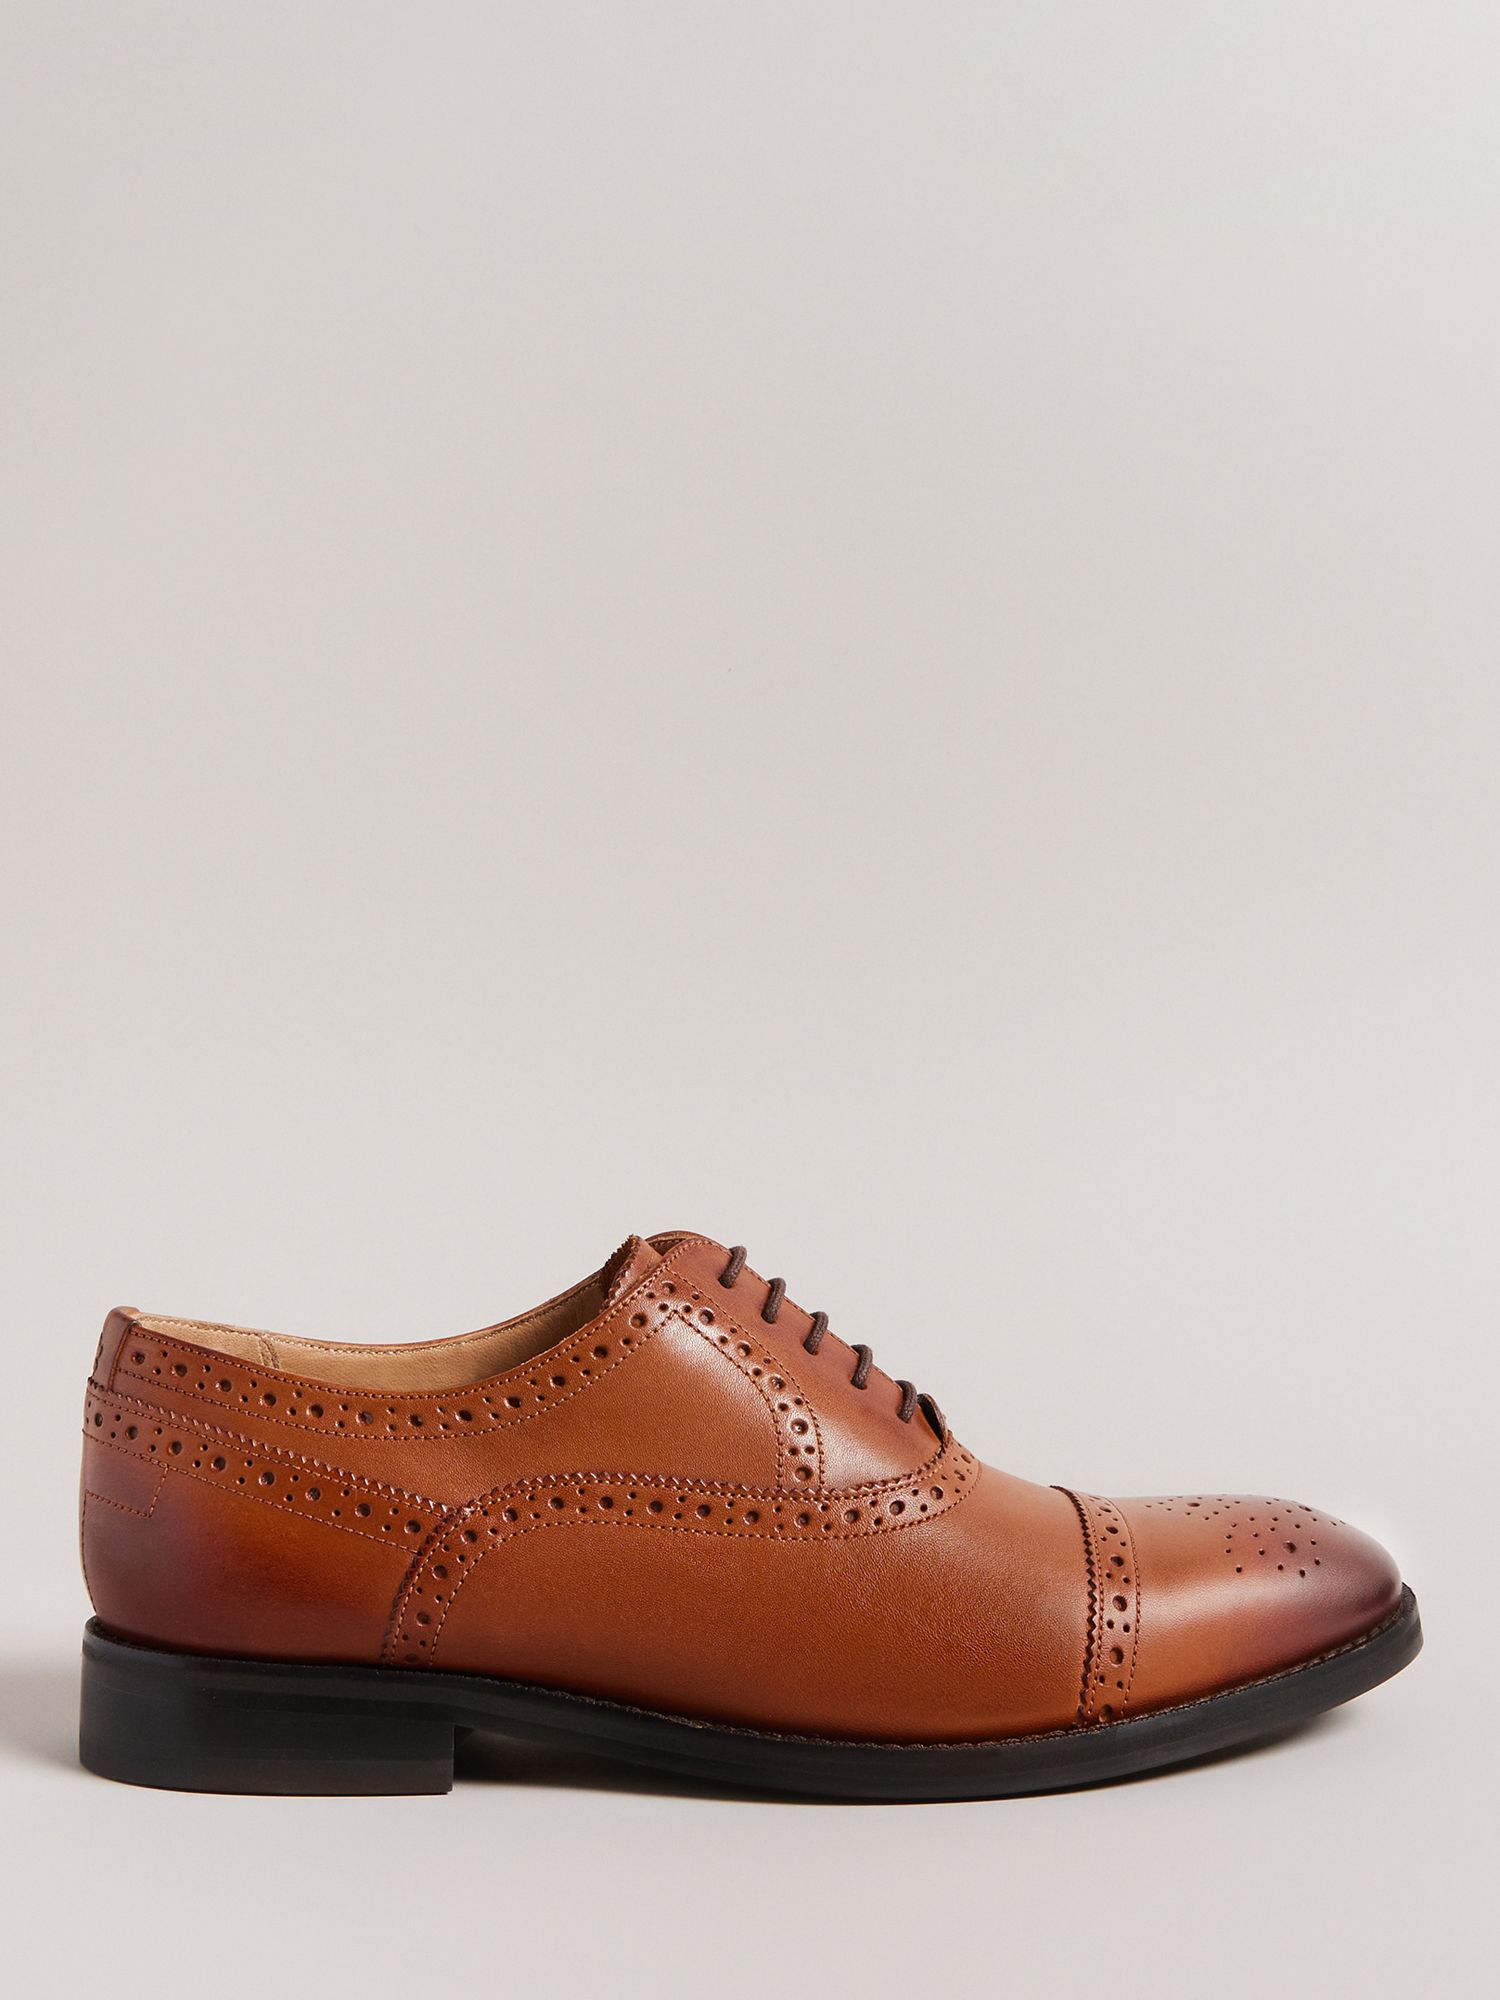 Ted Baker Arnie Leather Oxford Brogues, Tan, EU41